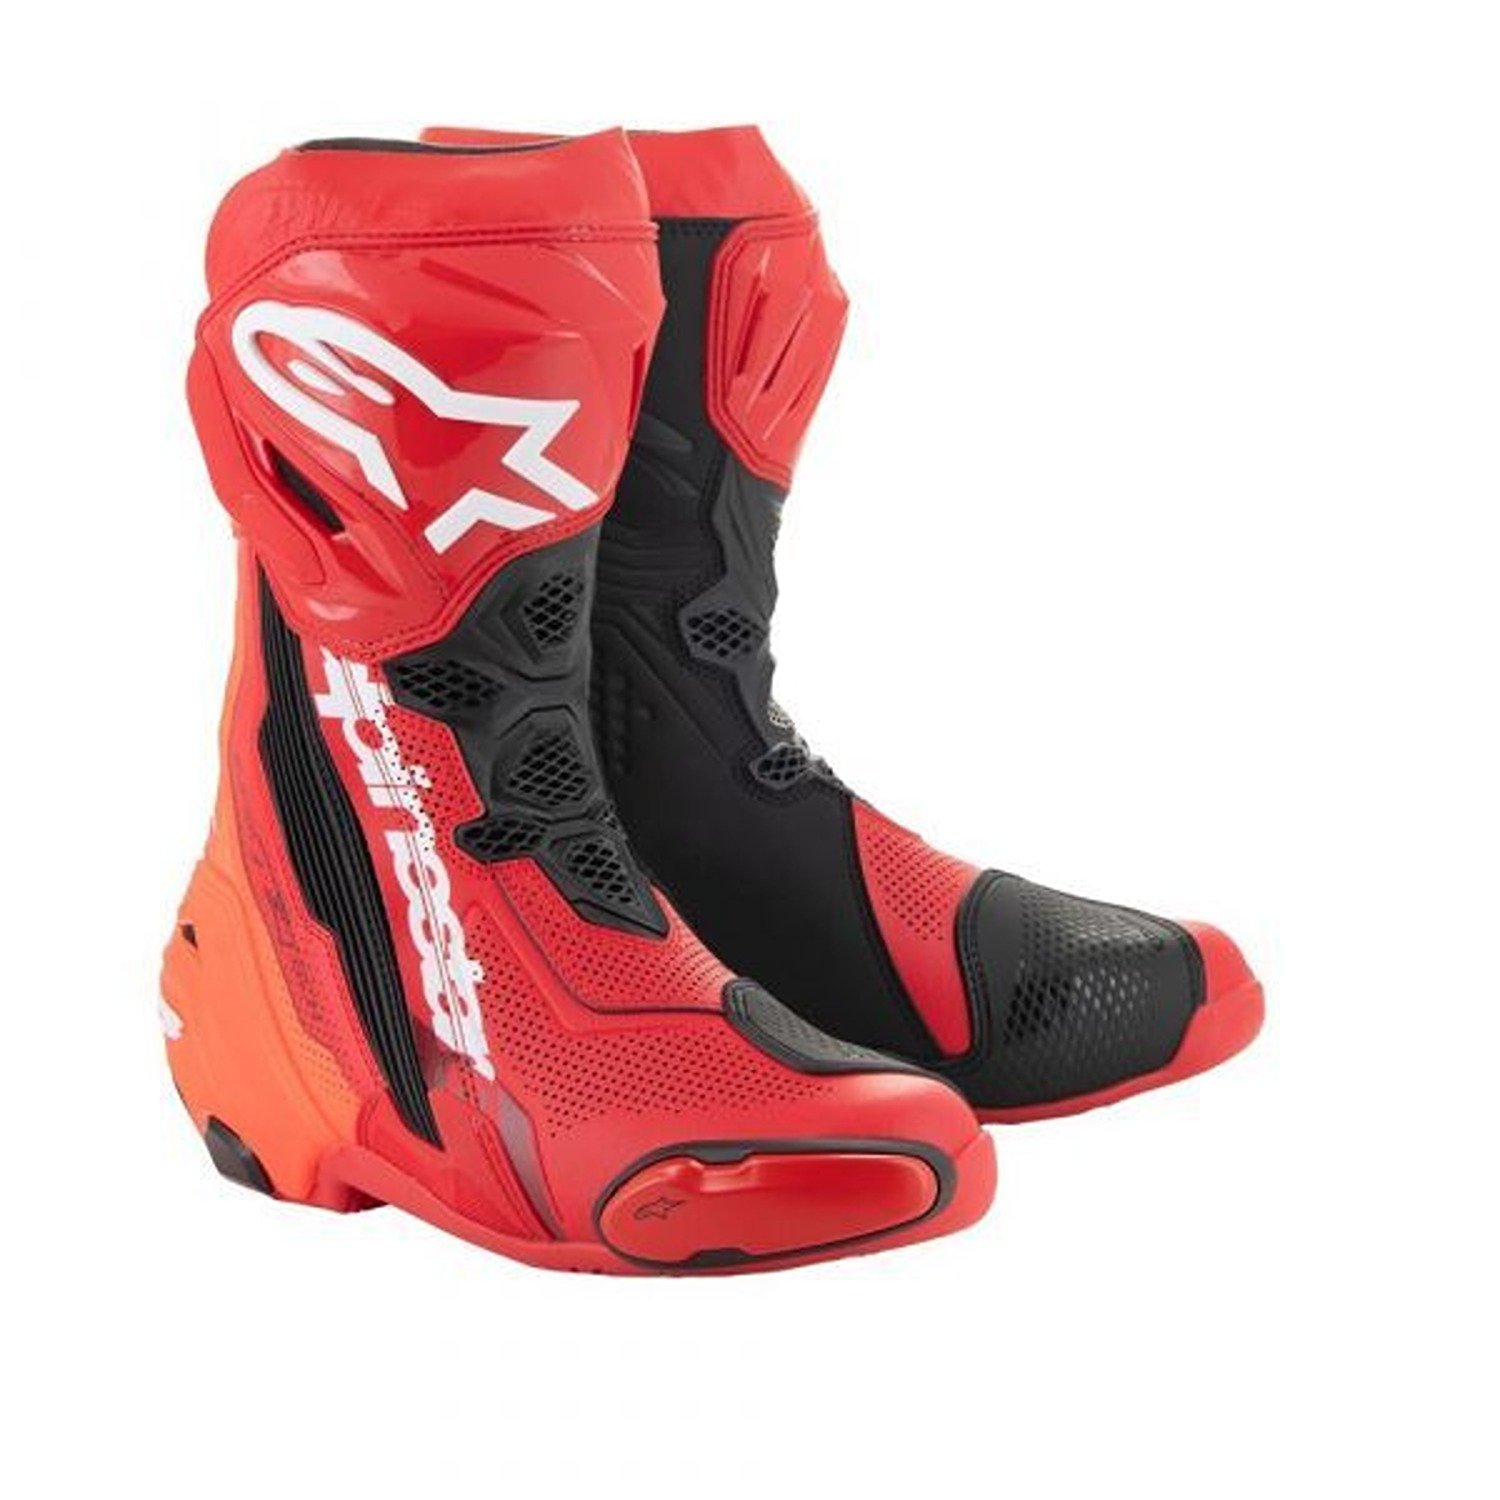 Image of Alpinestars Supertech R Vented Boots Bright Red Red Fluo Talla 45